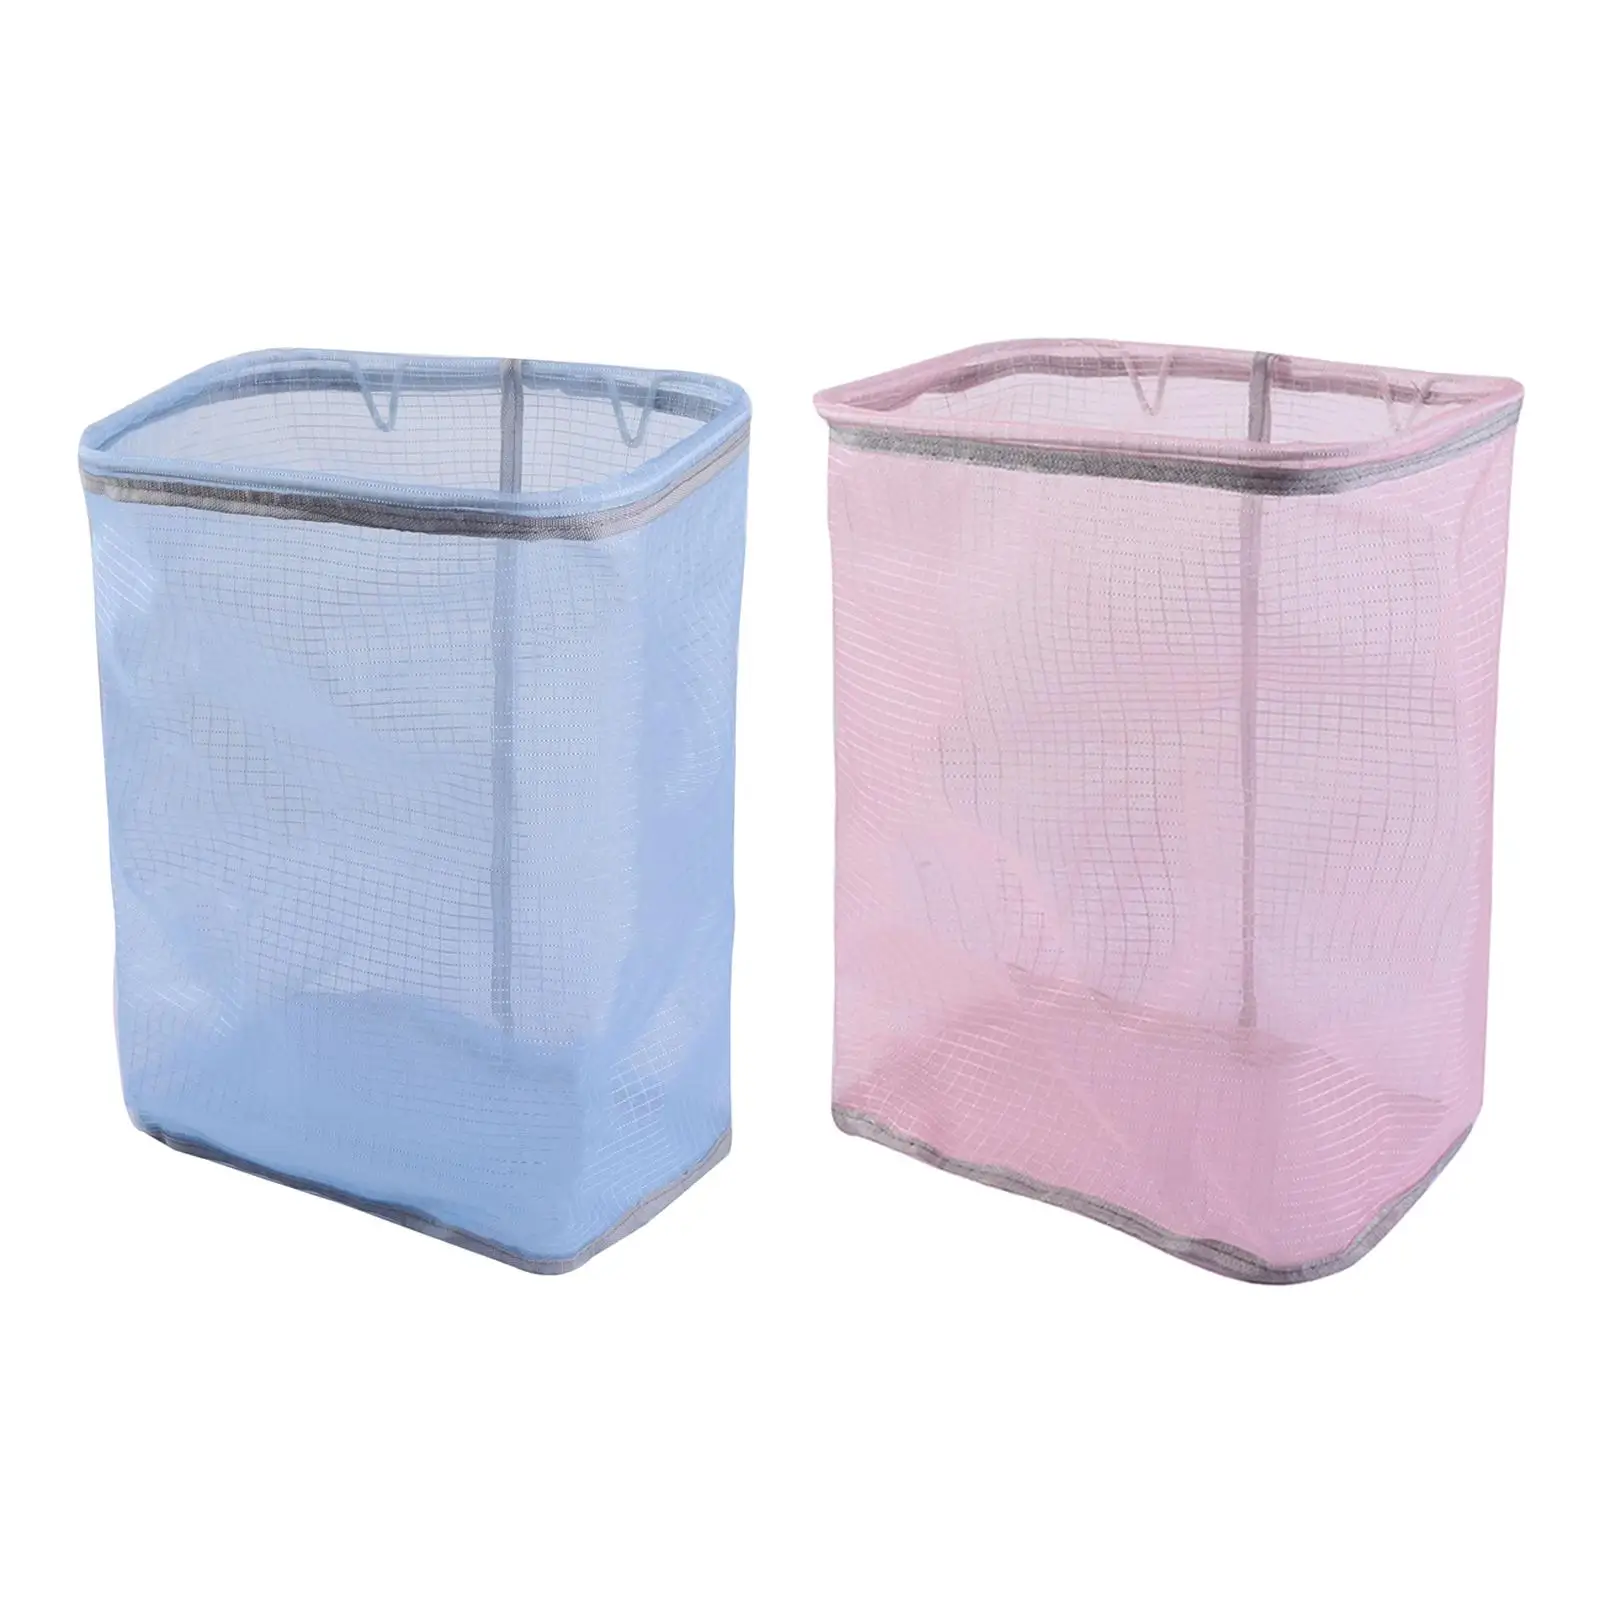 Collapsible Laundry Hamper Hanging Organizer Durable for Bathroom Dormitory